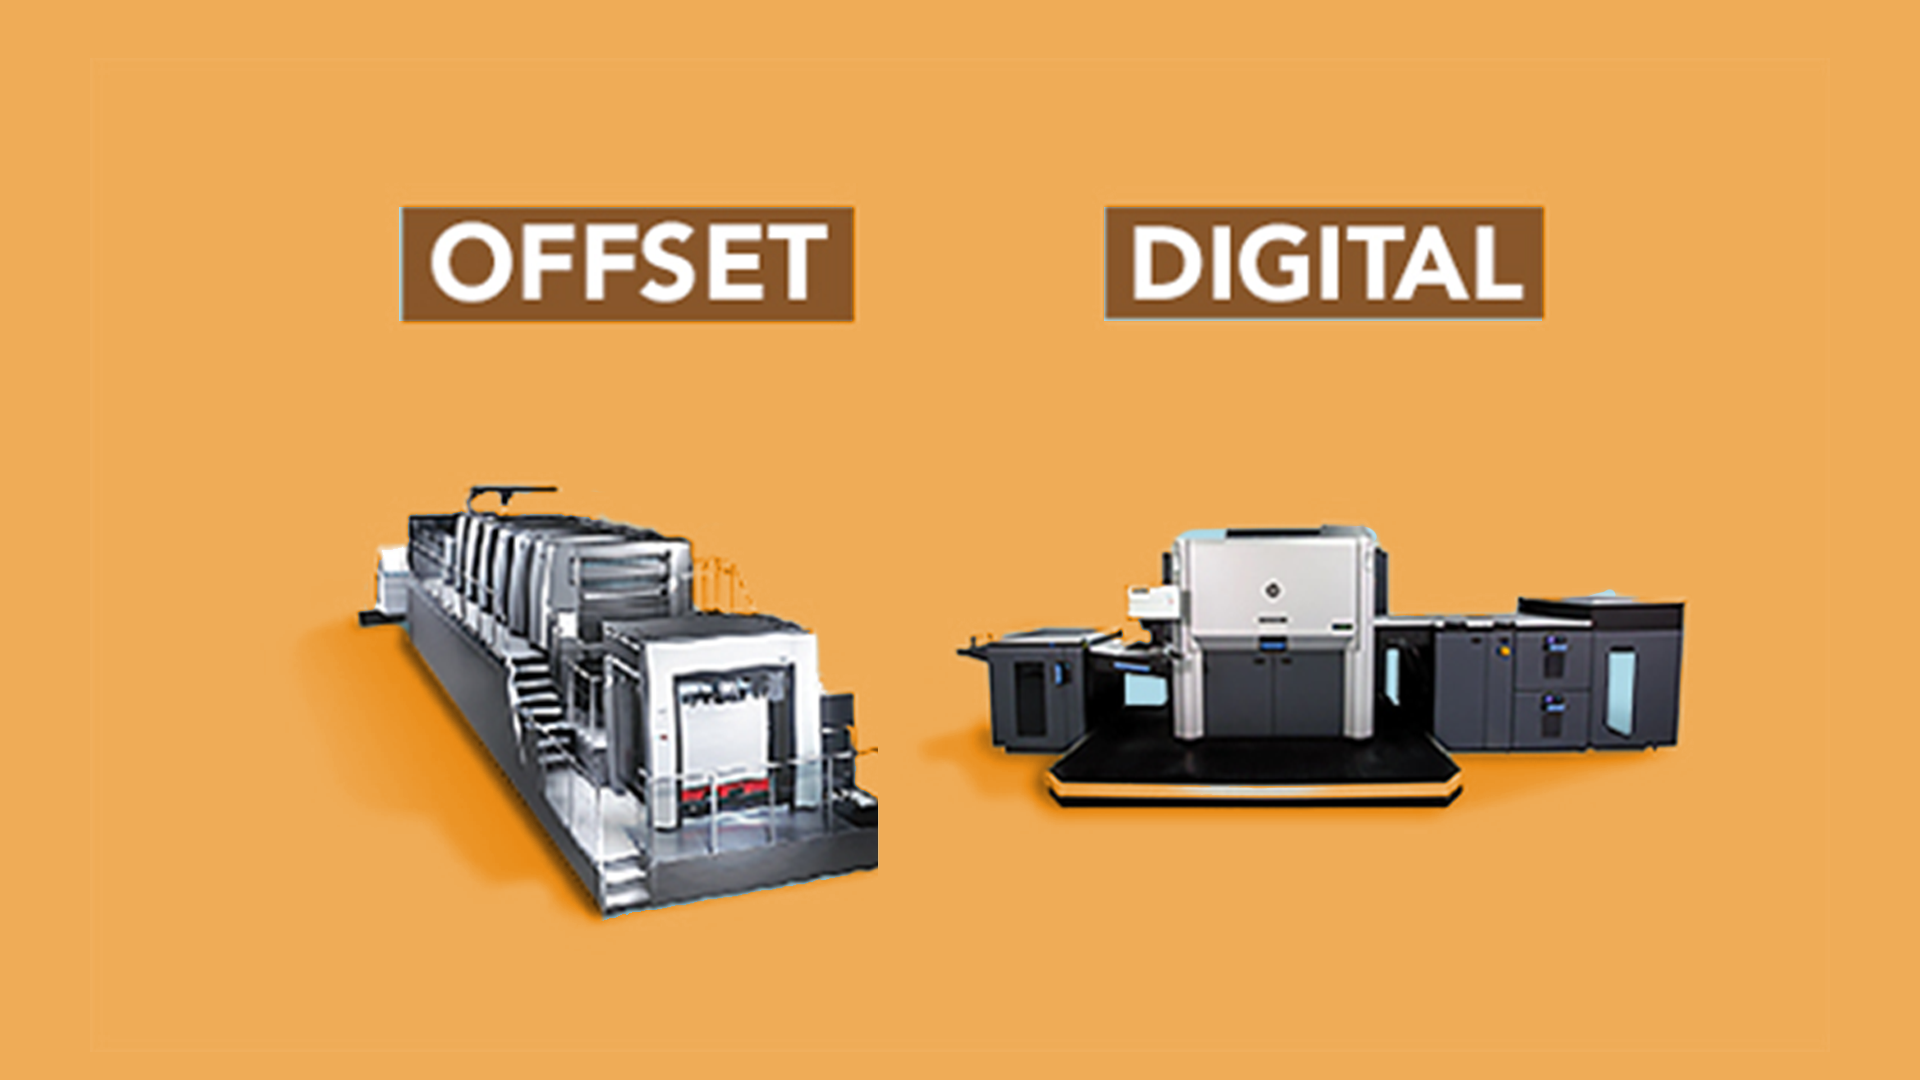 Digital and Offset Printing: Analysis of Advantages and Disadvantages